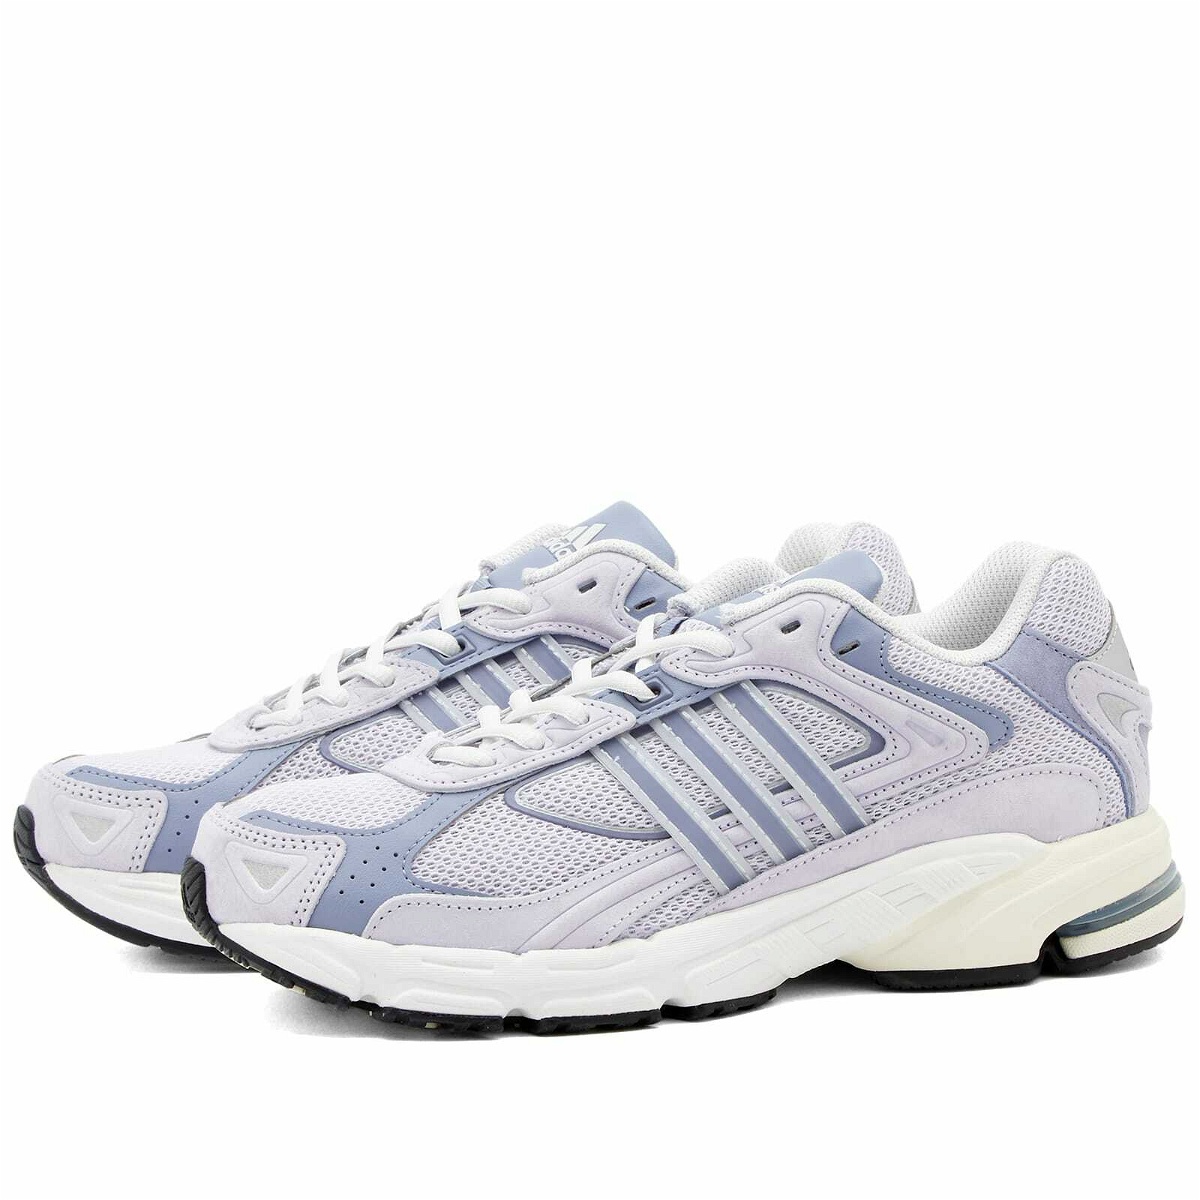 Adidas Women's Response CL W Sneakers in Silver Dawn/Violet/Crystal adidas